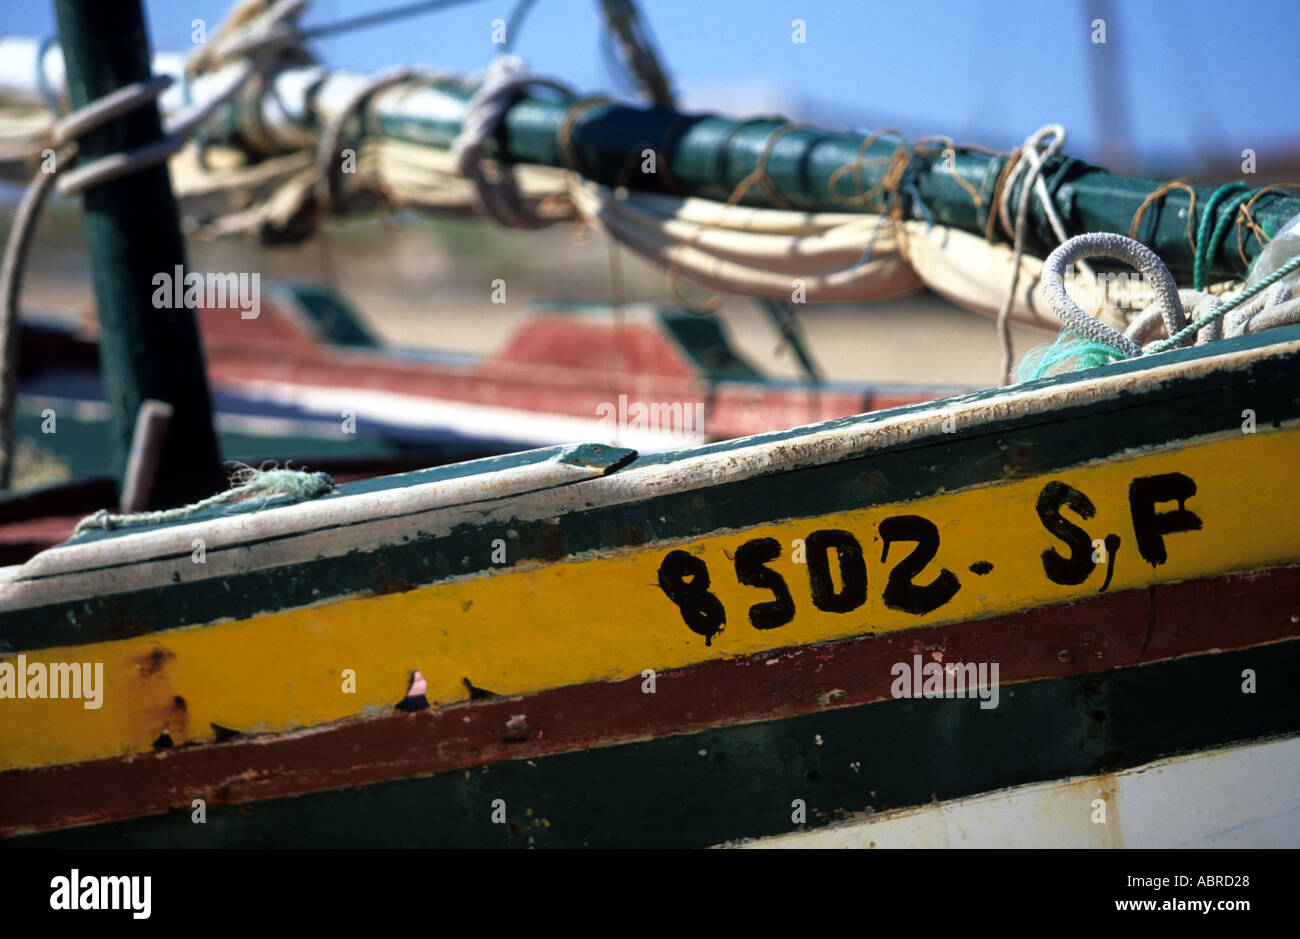 Wooden fish boat in typical colors in Tunisia Stock Photo